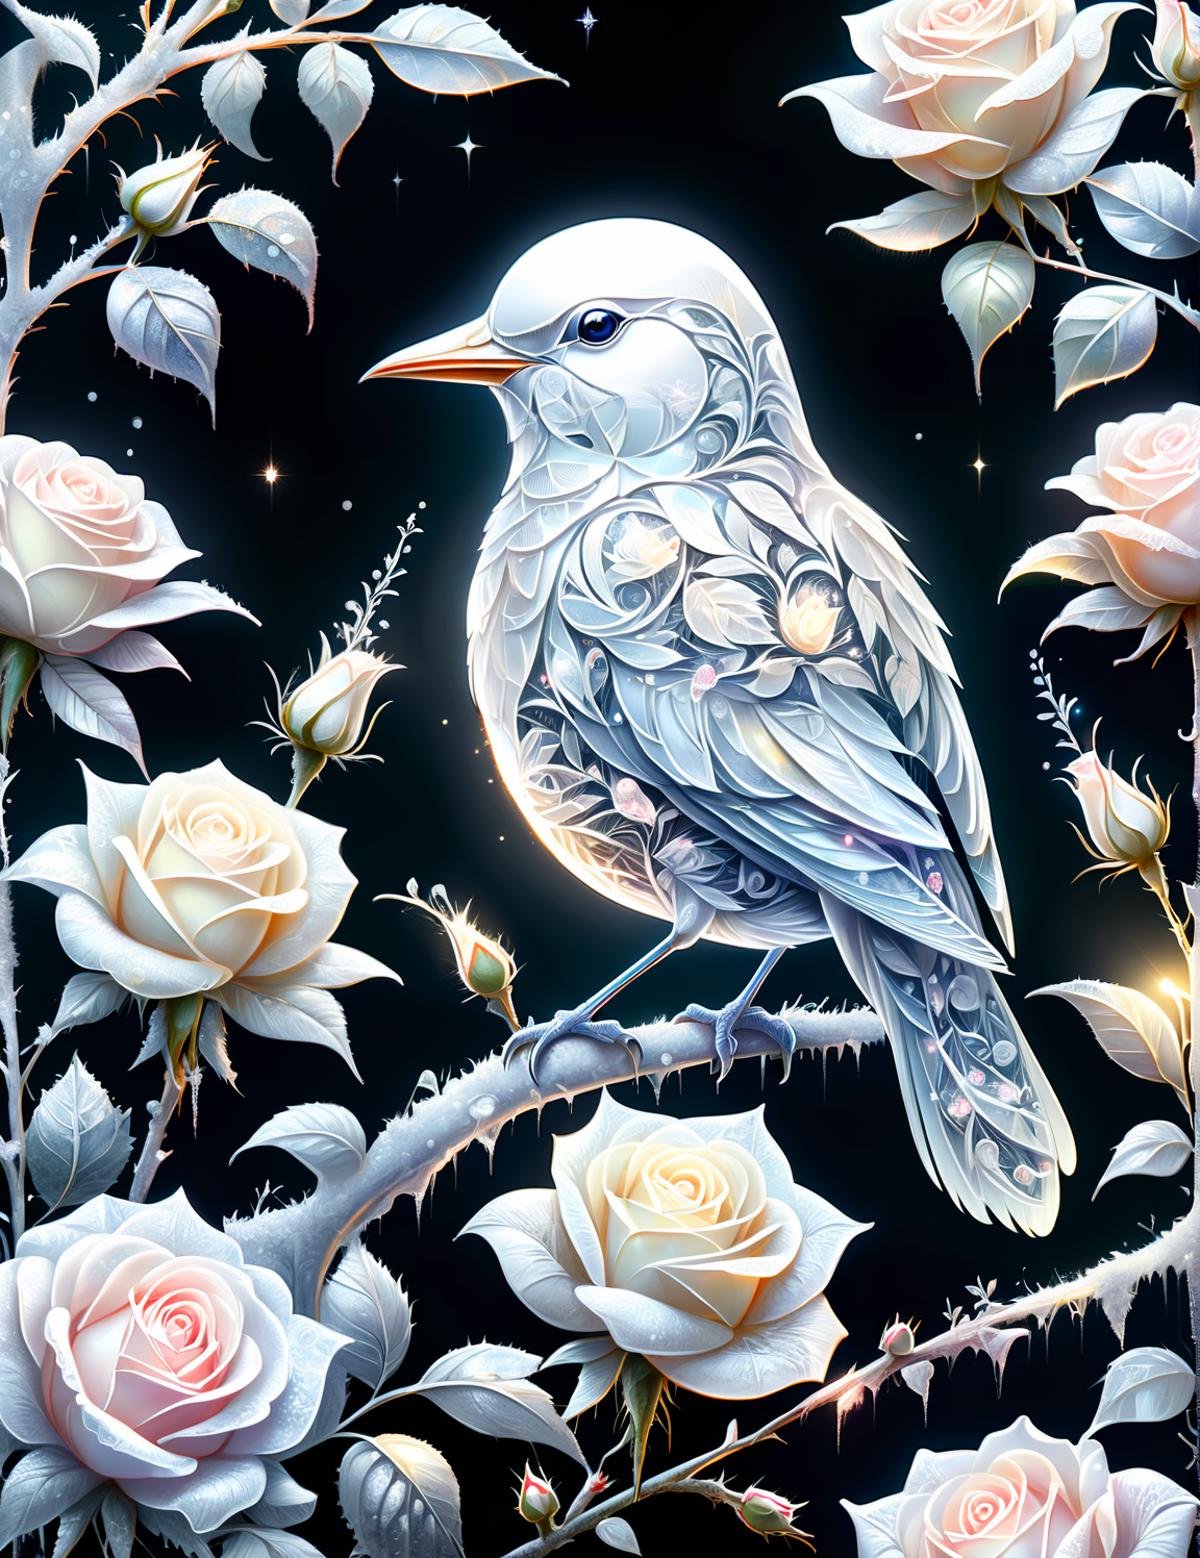 A White Bird Sitting on a Branch Among Pink and White Roses.